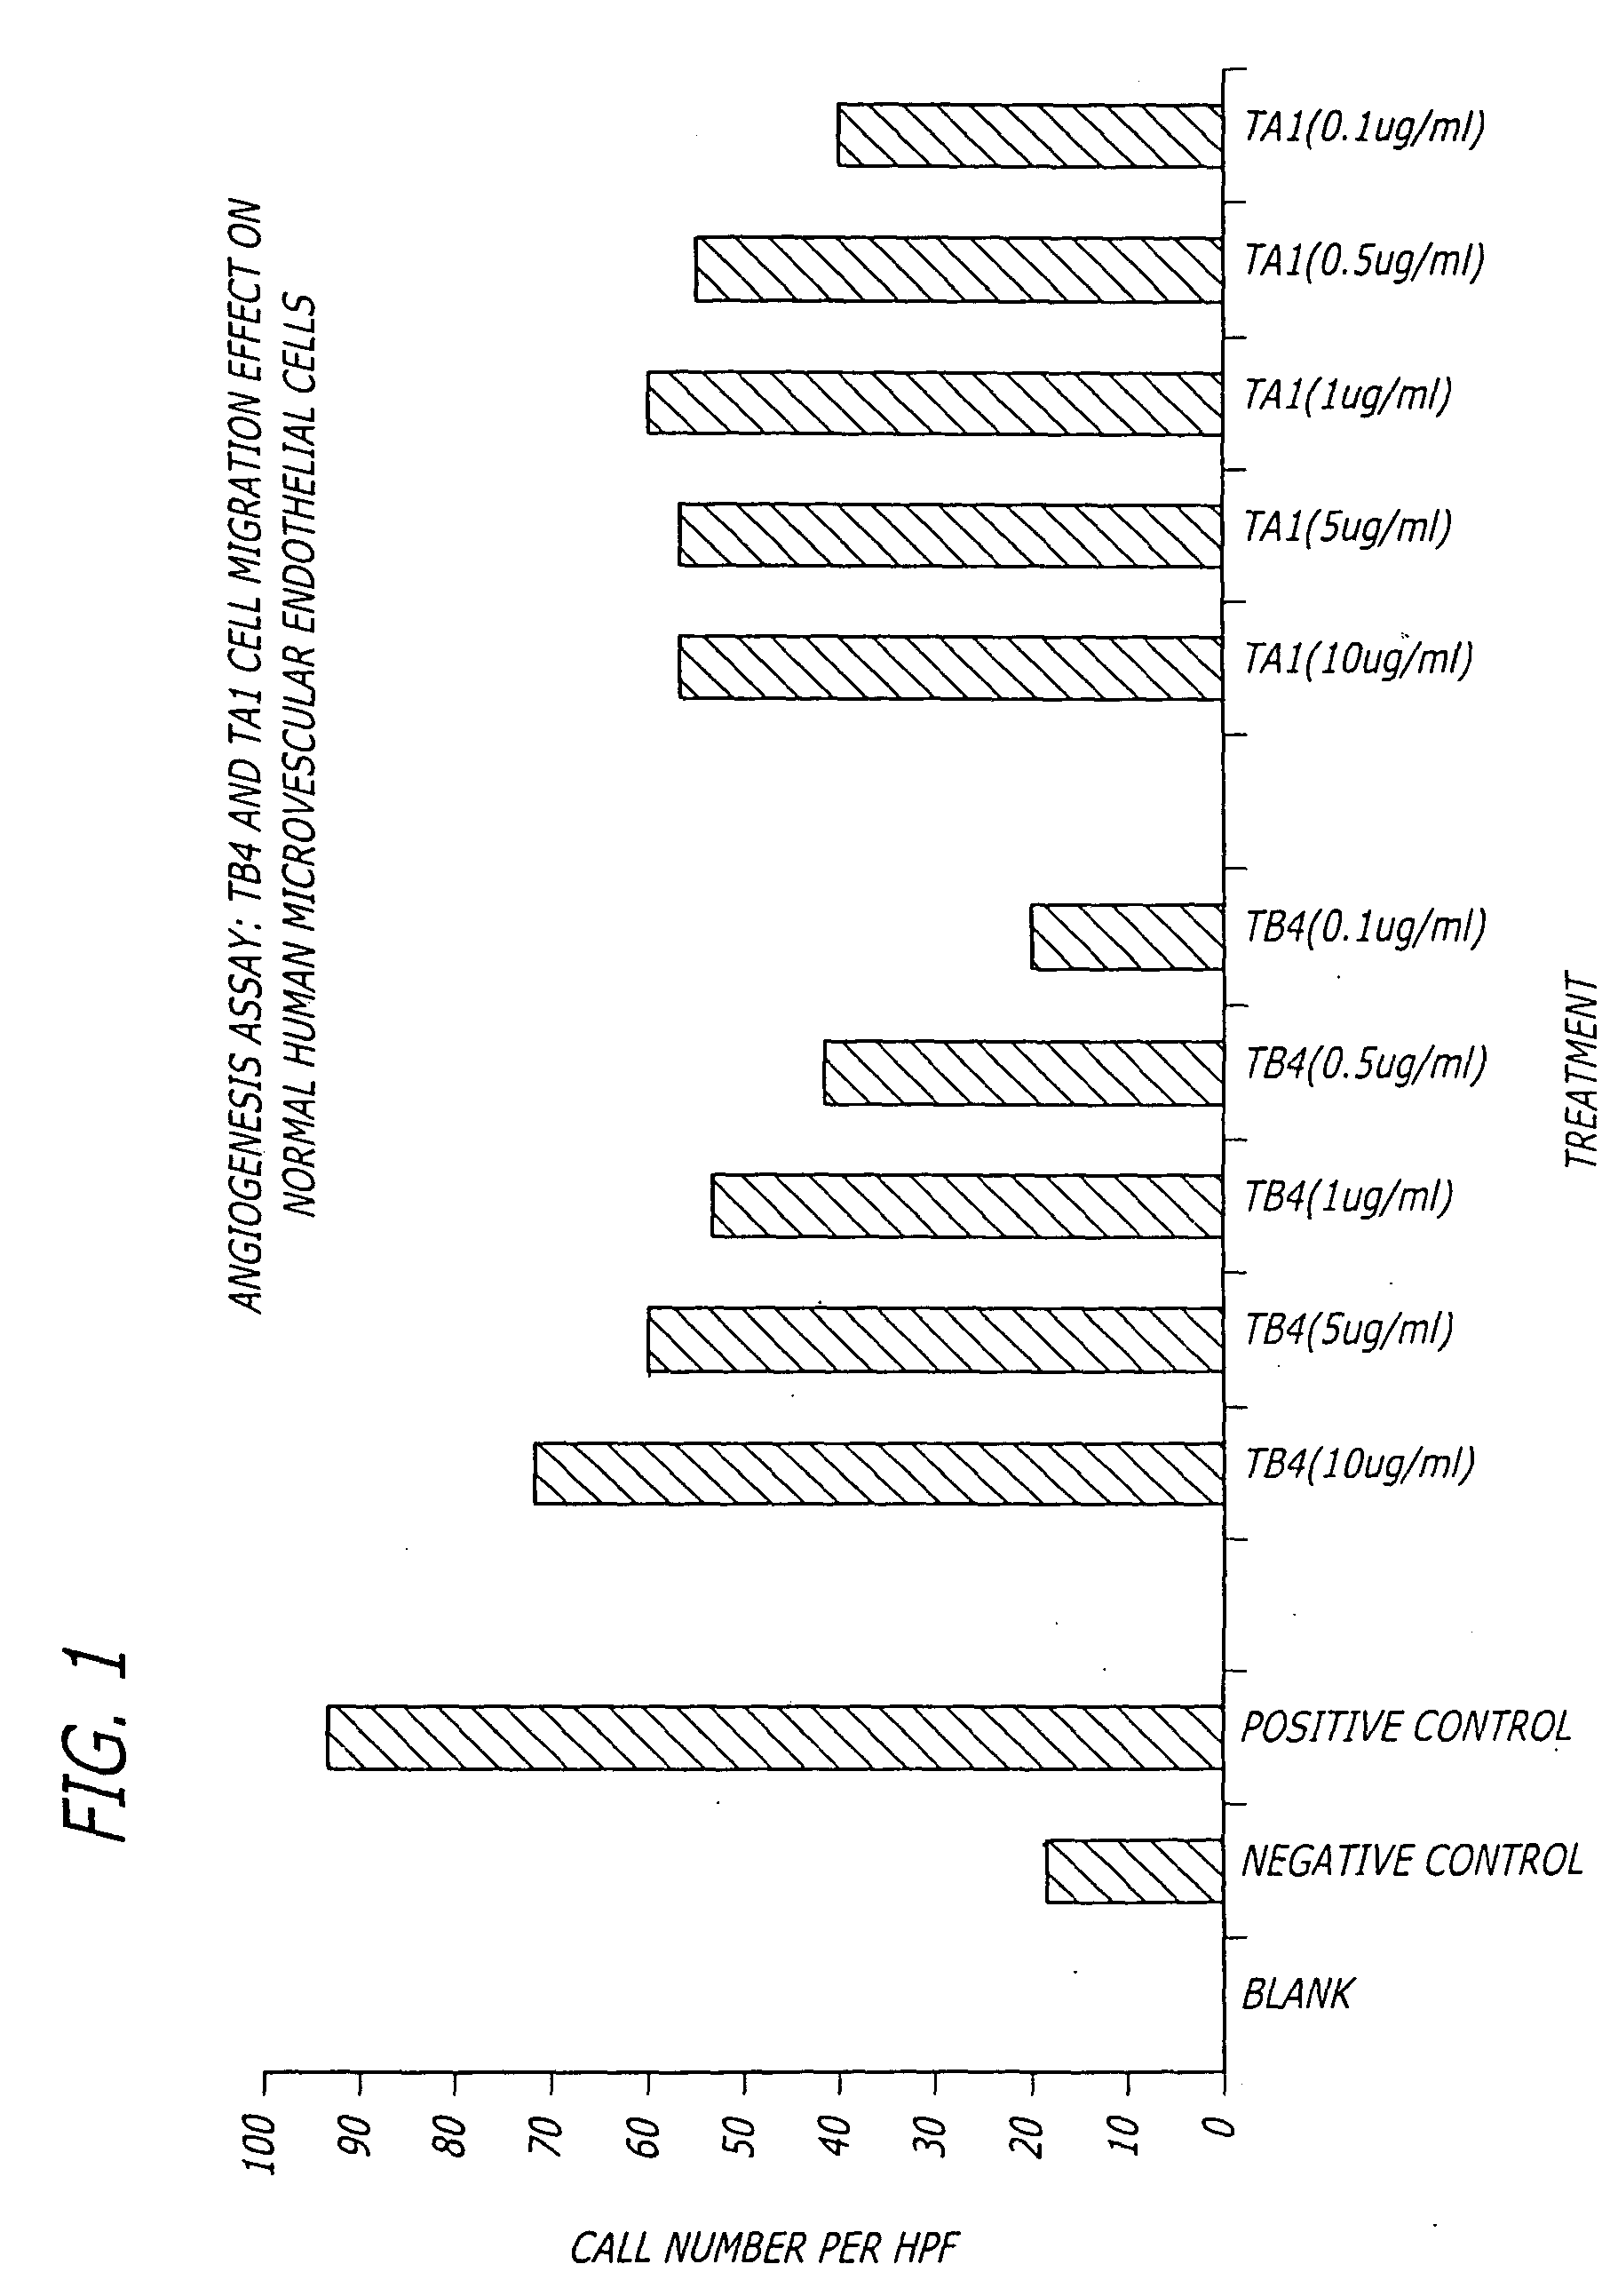 Peptides with wound healing activity